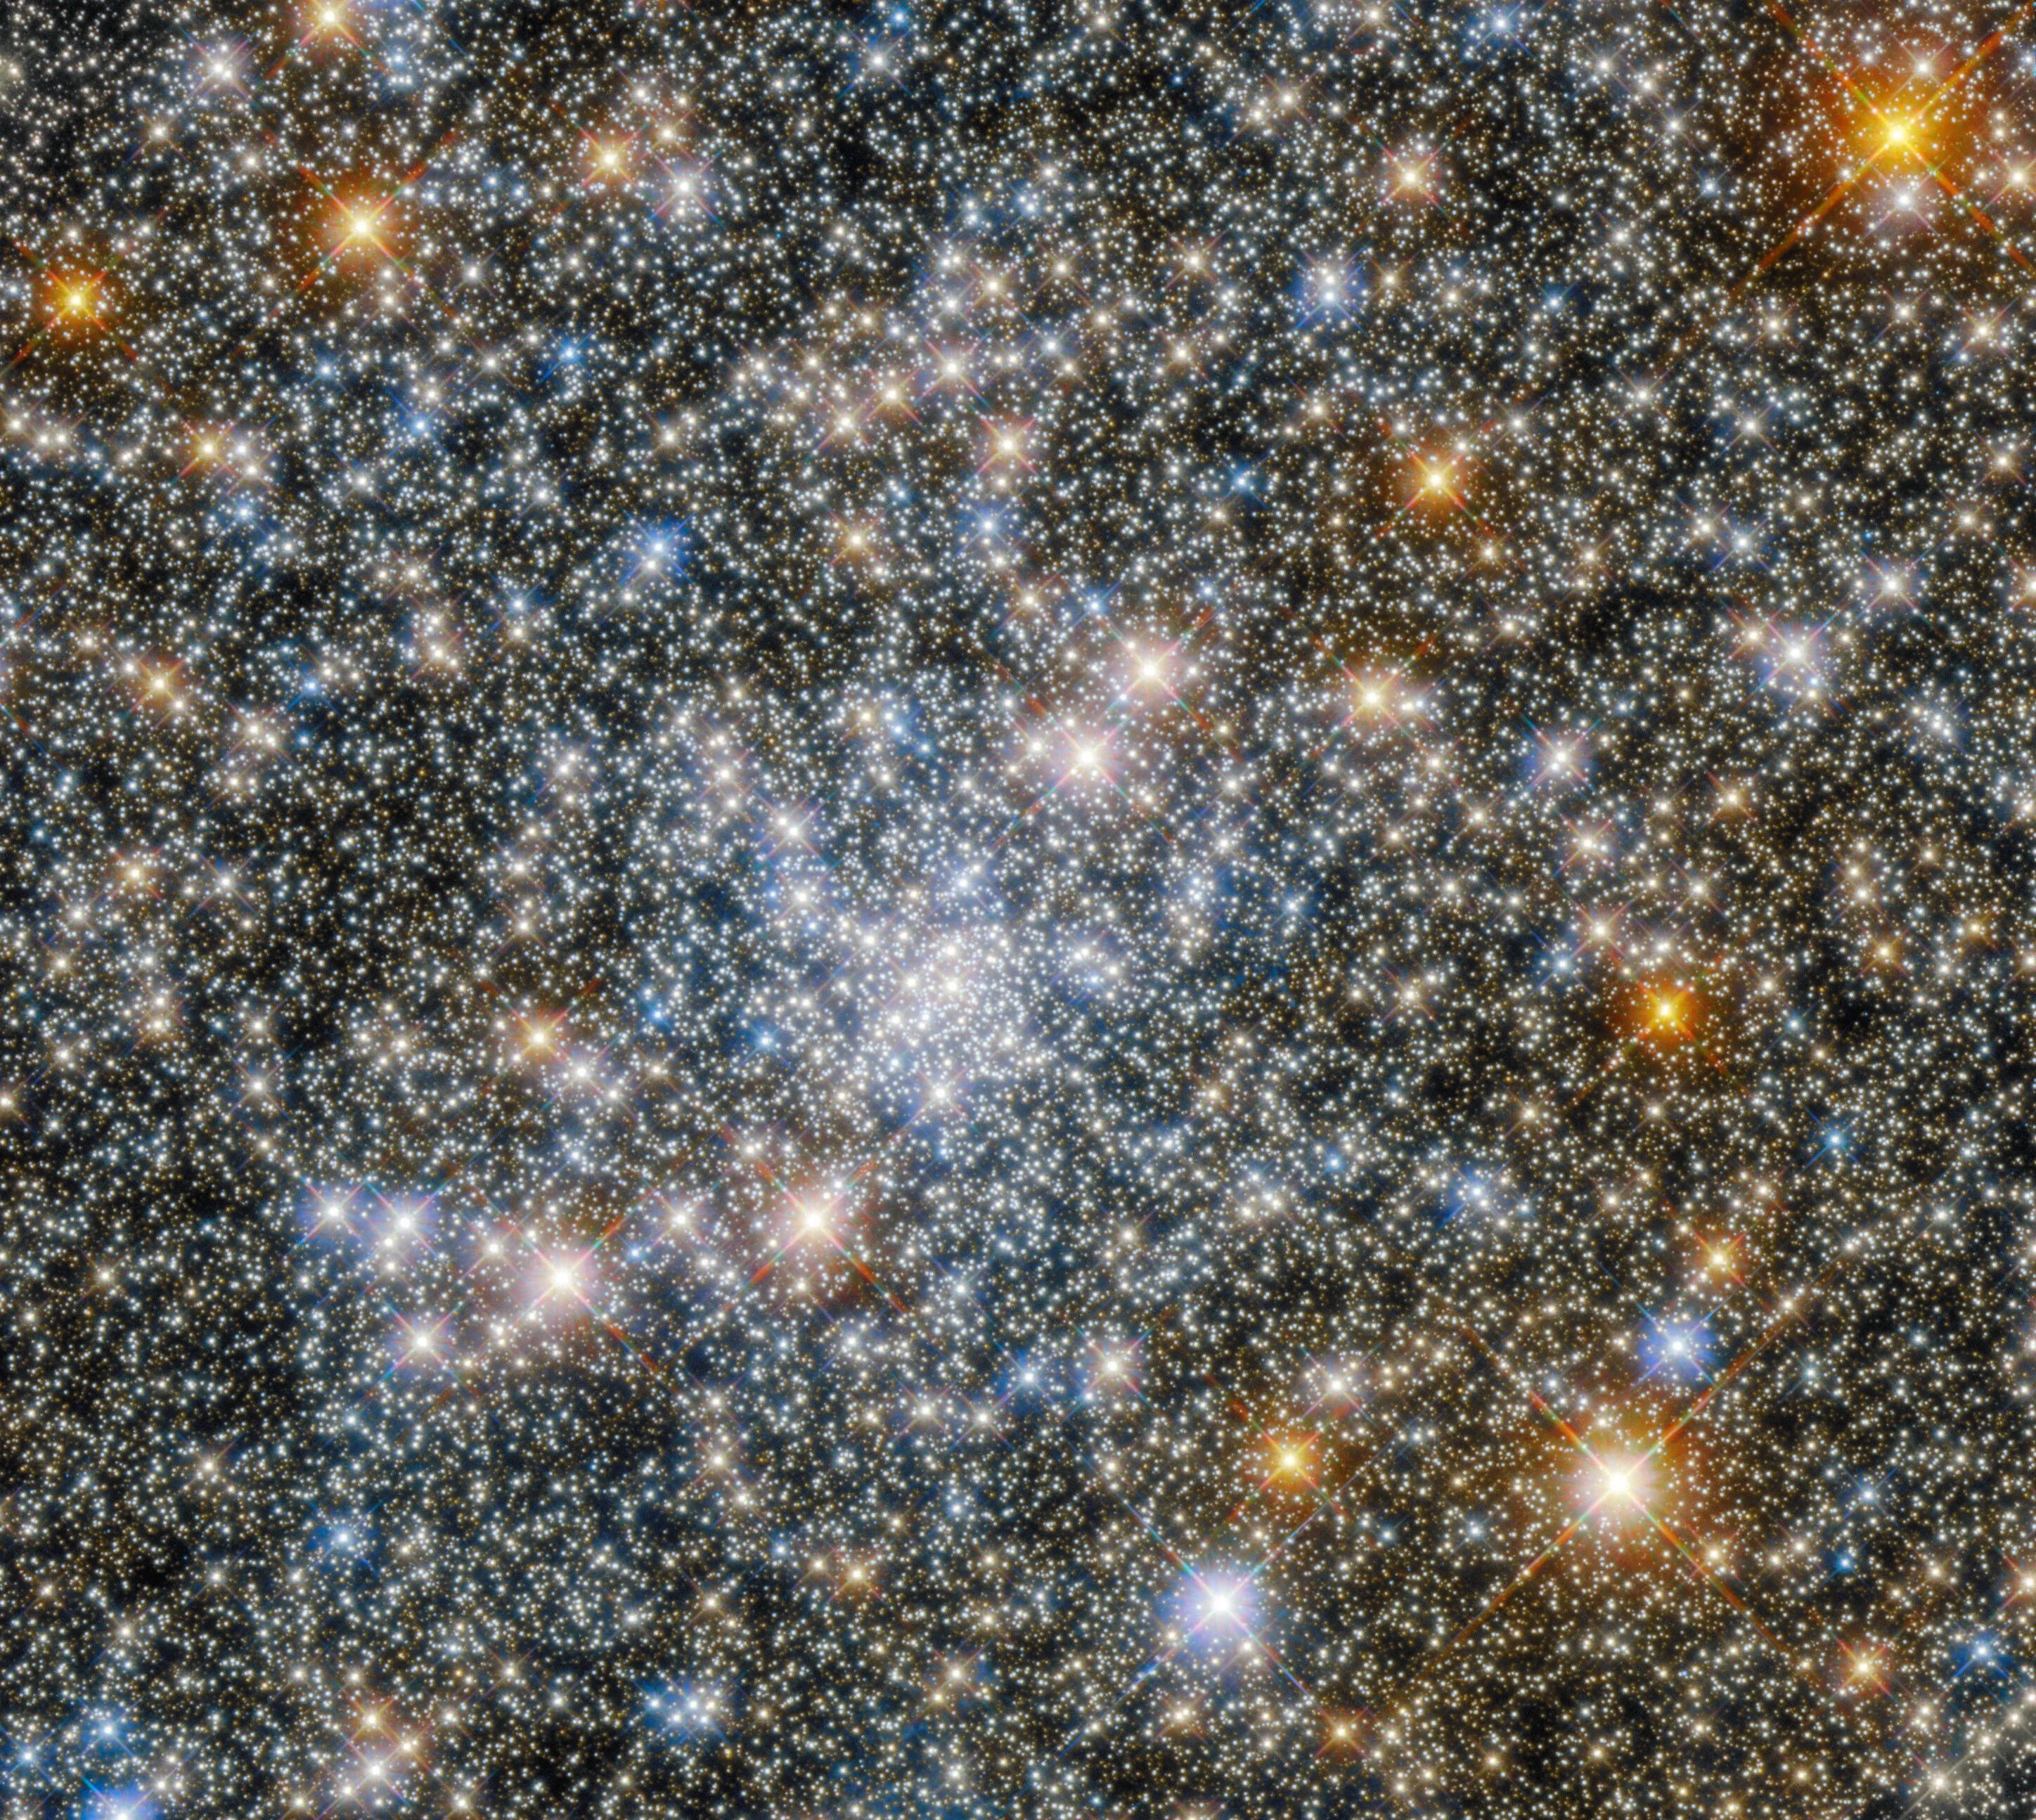 Stars fill the image. bright, blue-white stars are concentrated in the image's center. large, gold stars dot the scene.